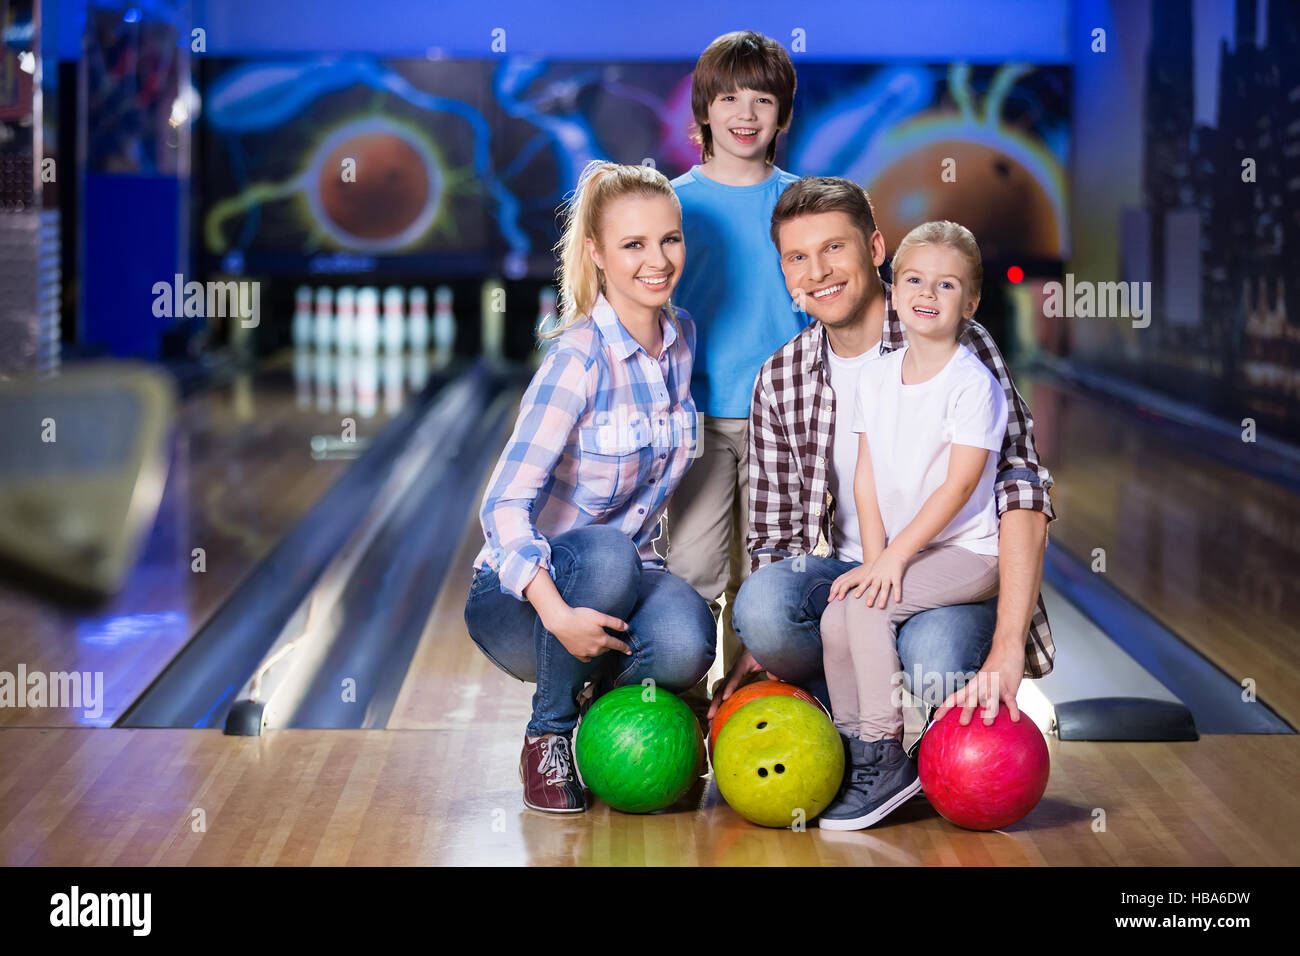 Family with children Stock Photo